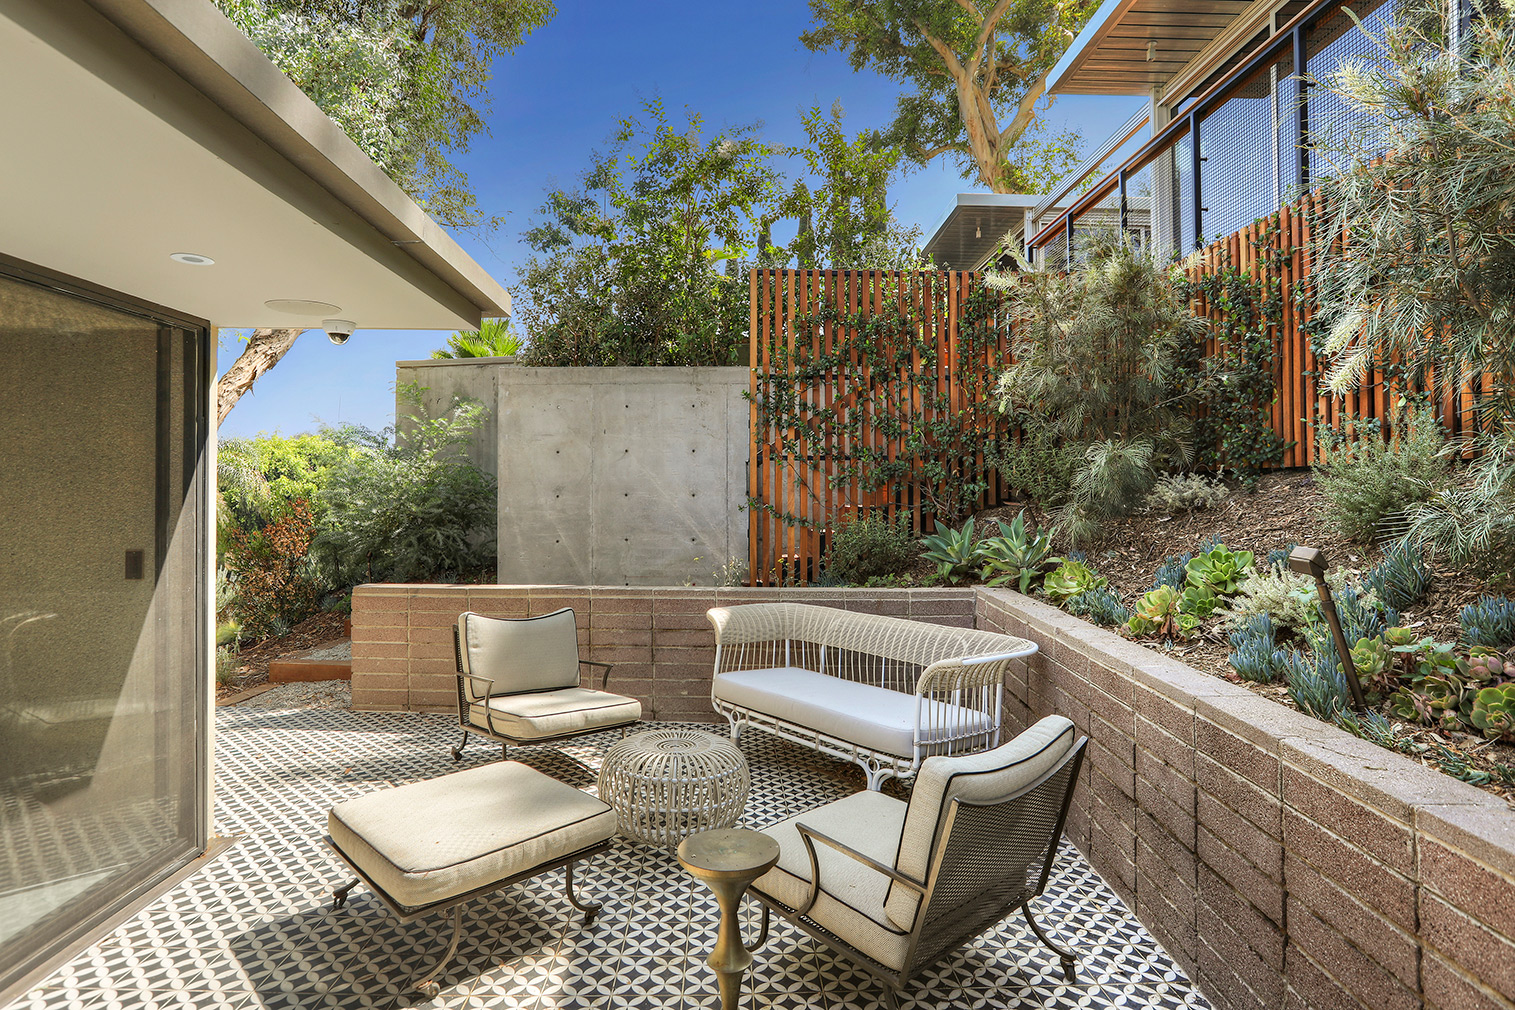 Restored modernist bolthole by Albert Martin lists for $5.1m in LA